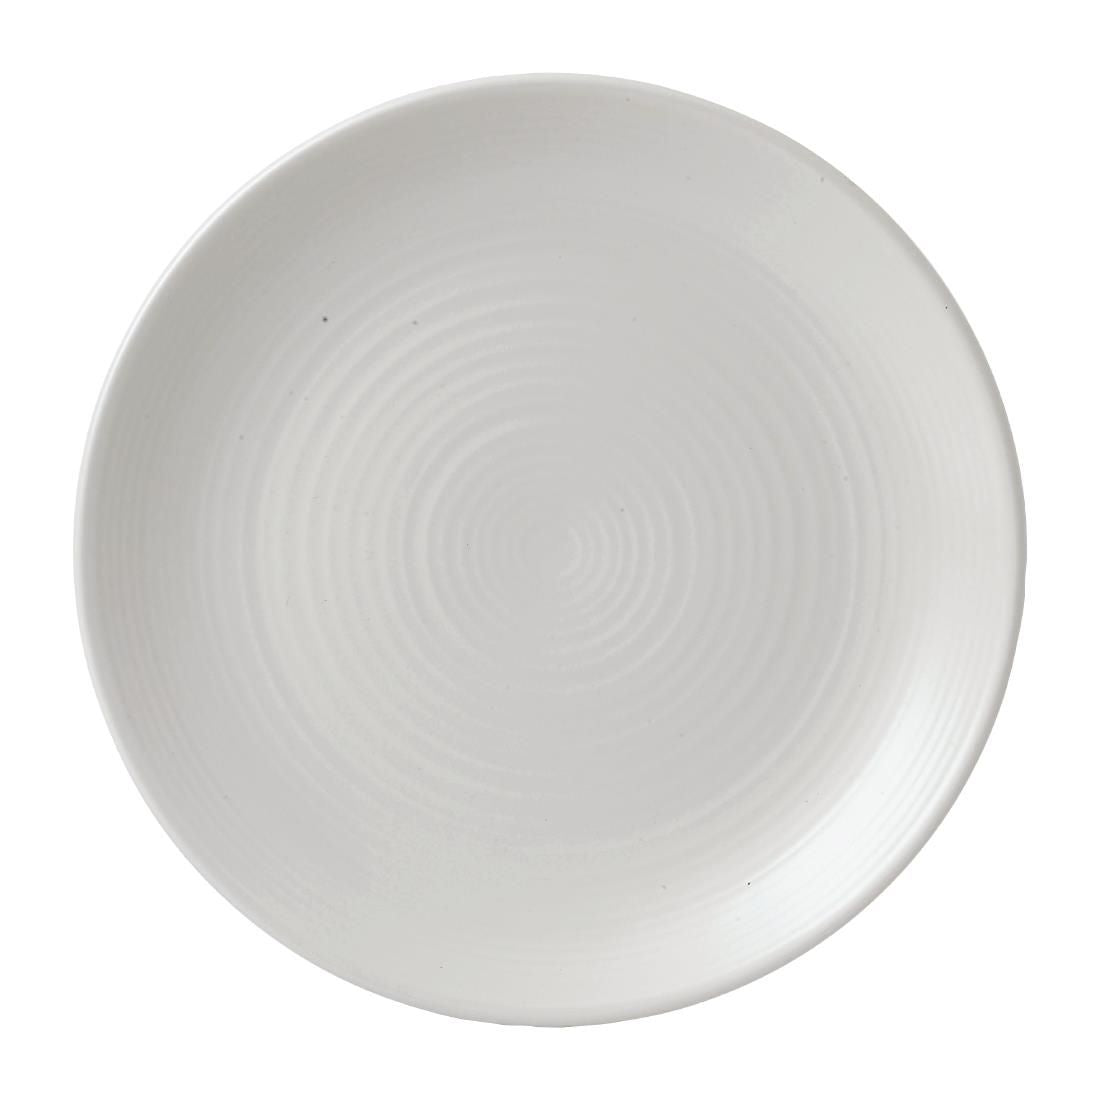 FE340 Dudson Evo Pearl Coupe Plate 295mm (Pack of 6) JD Catering Equipment Solutions Ltd